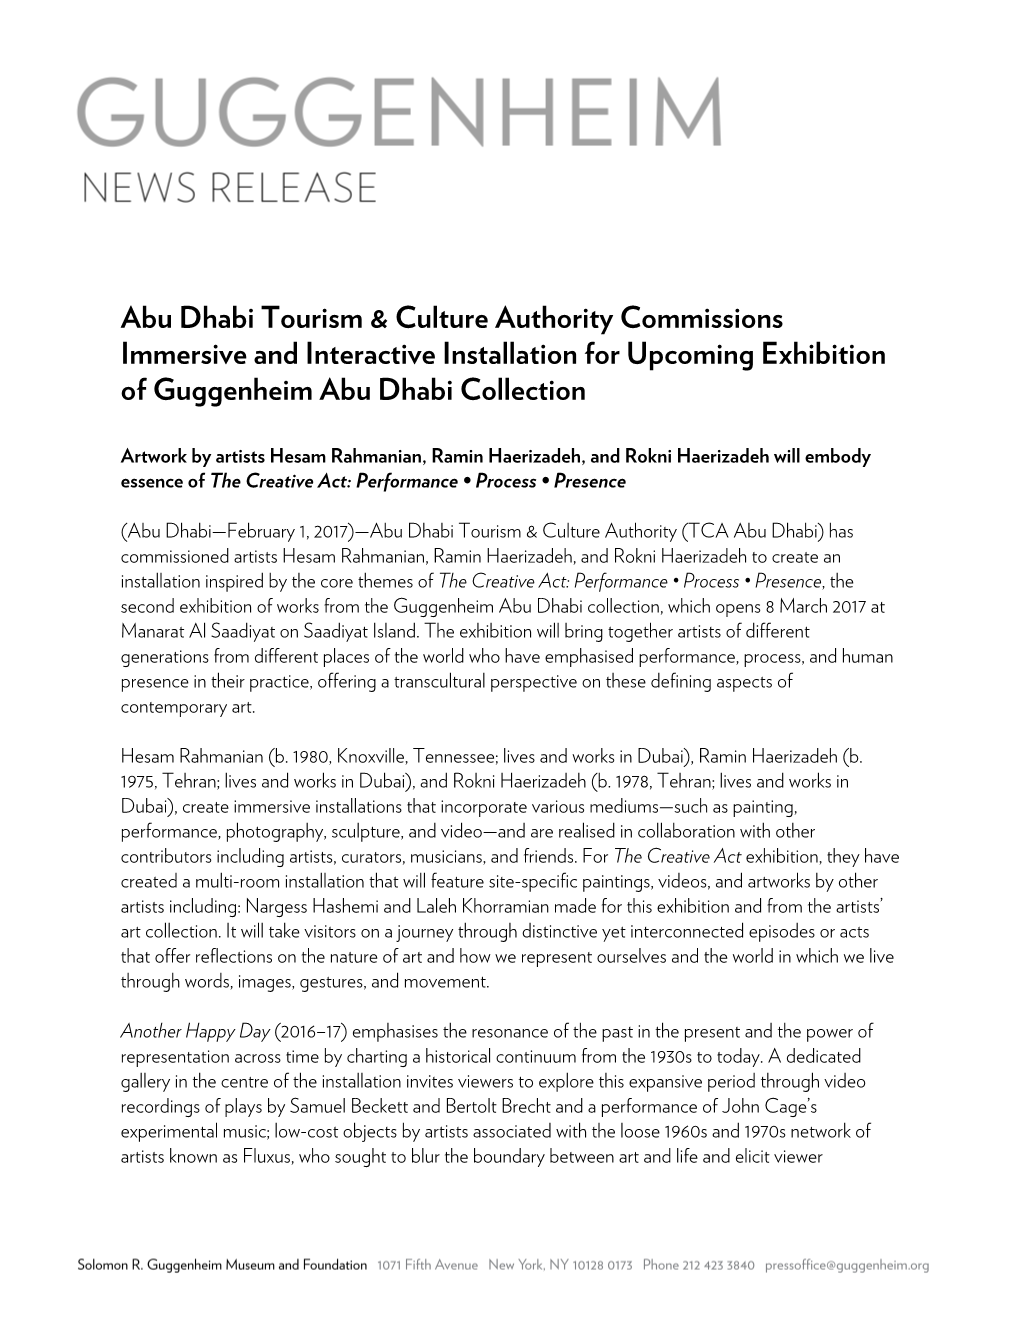 Abu Dhabi Tourism & Culture Authority Commissions Immersive